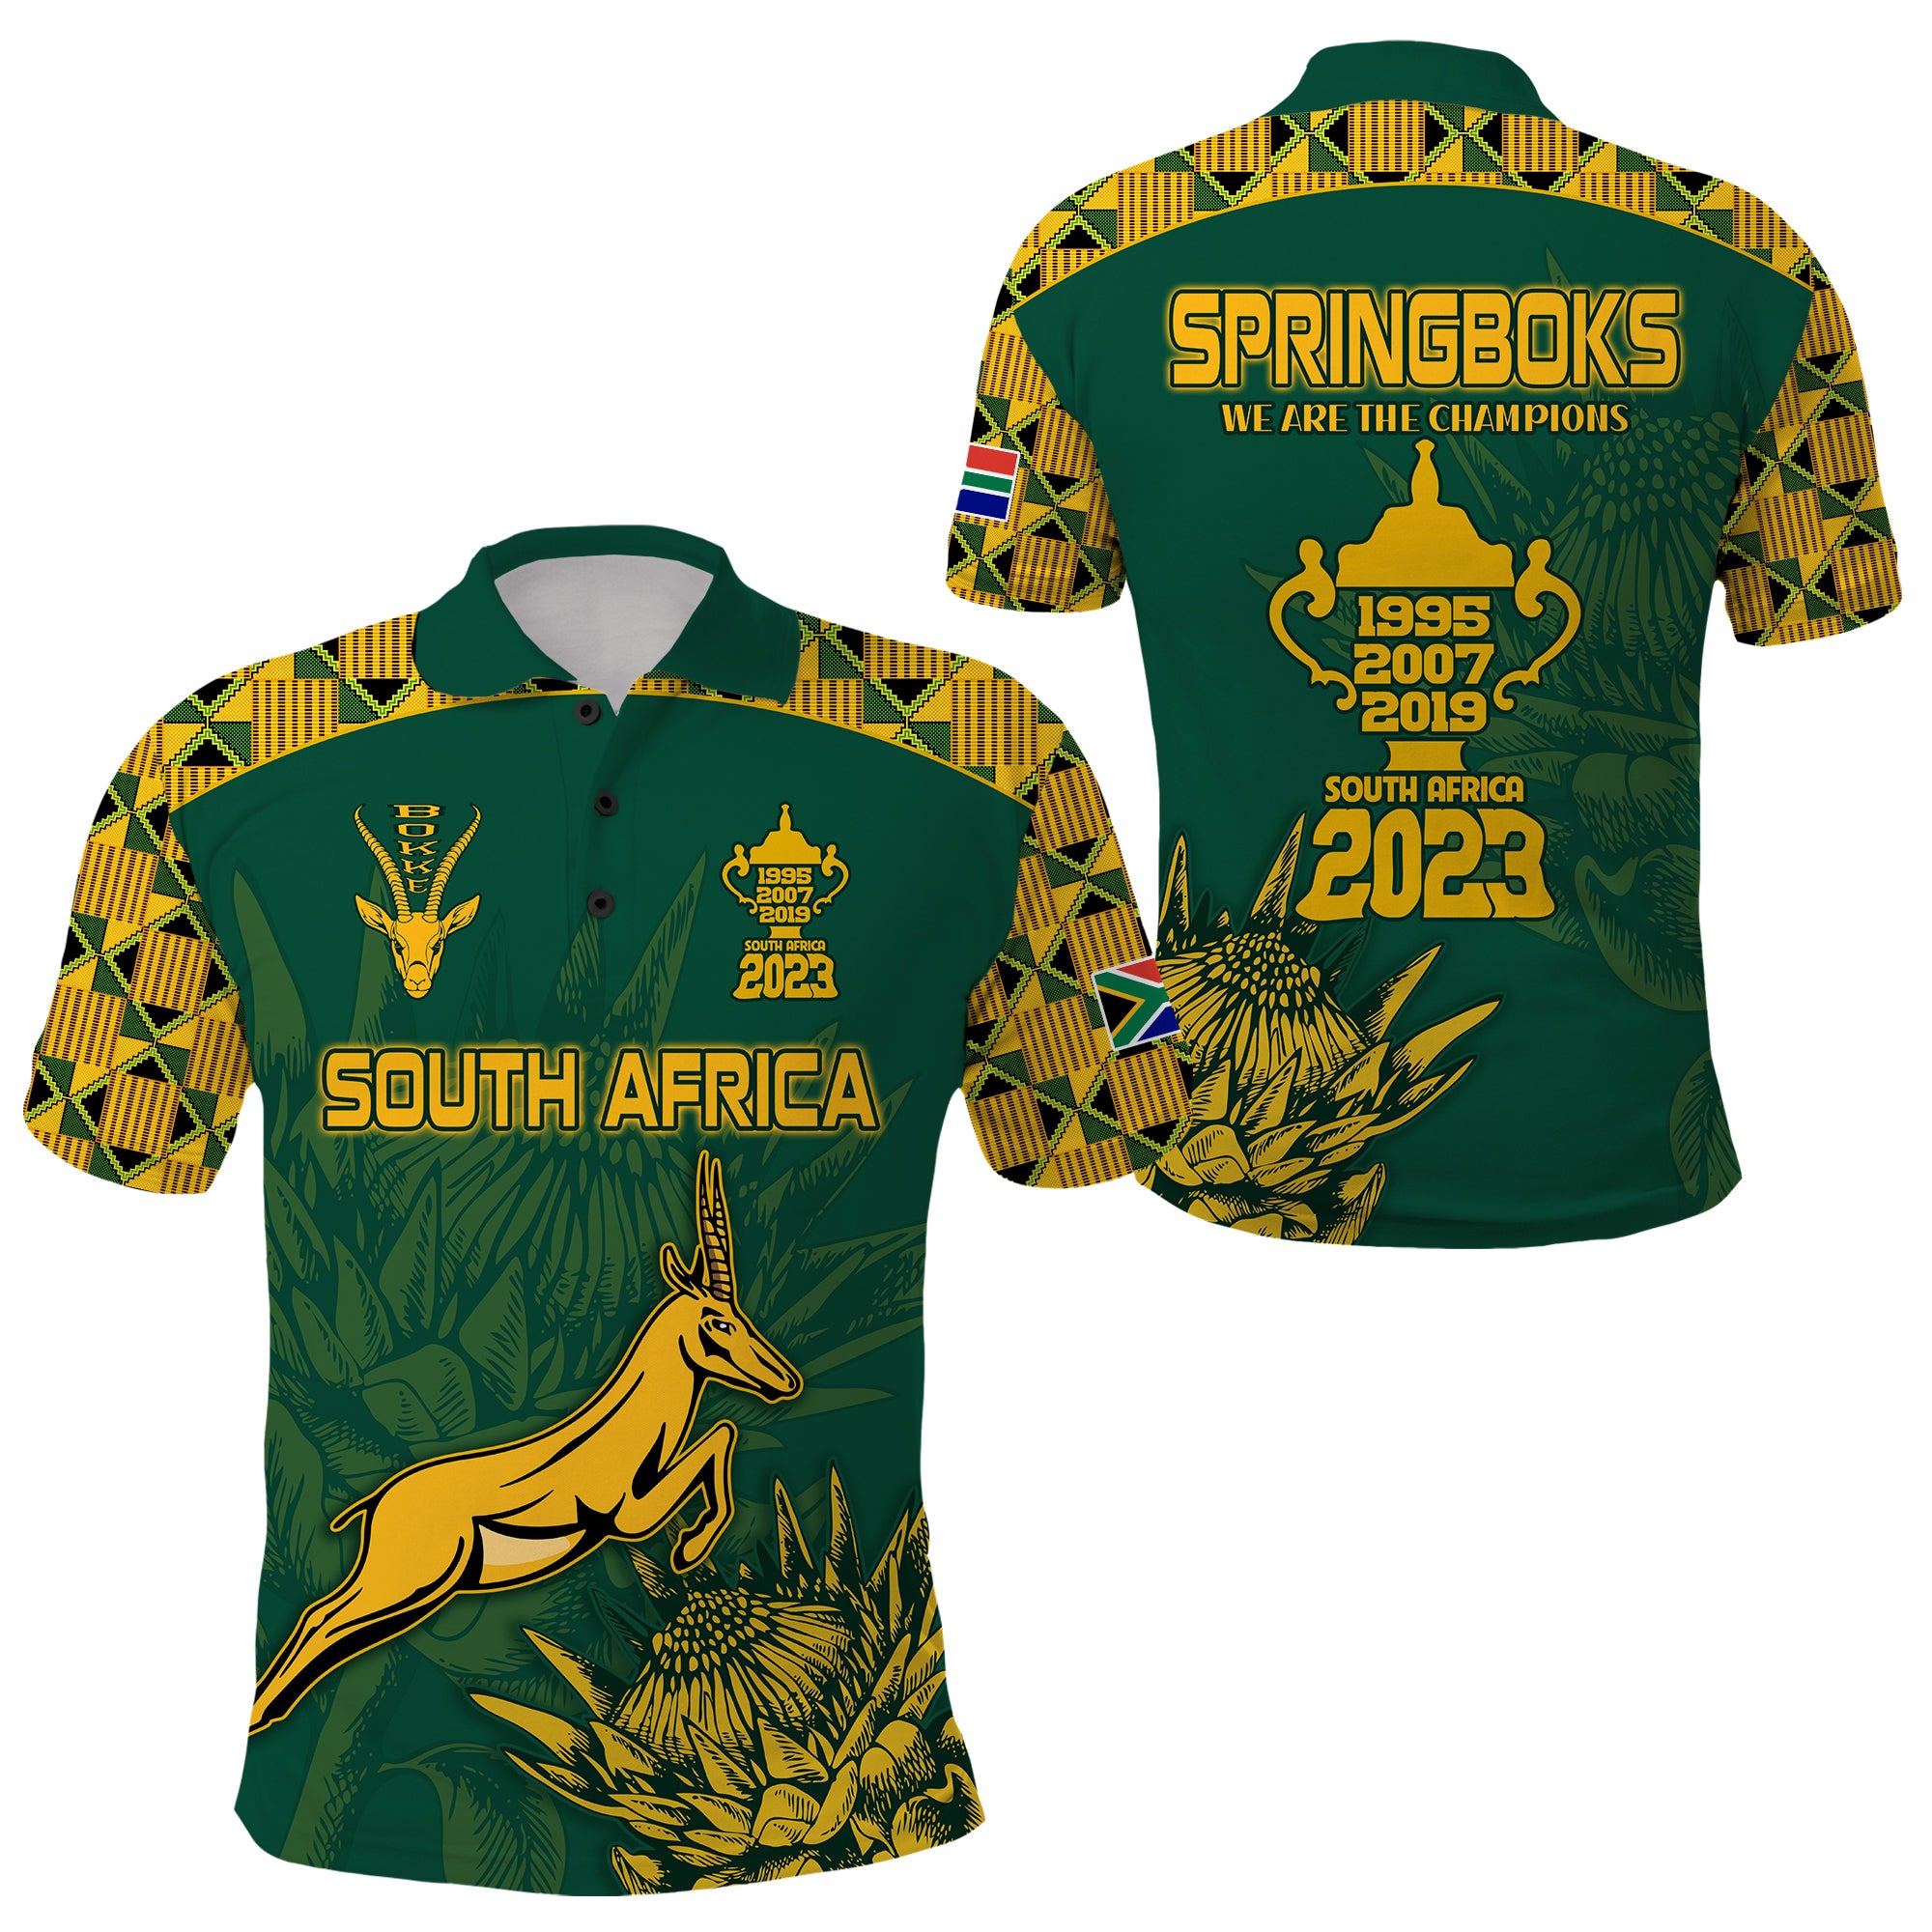 Springboks South Africa Rugby Polo Shirt Proud Be The Champions LT9